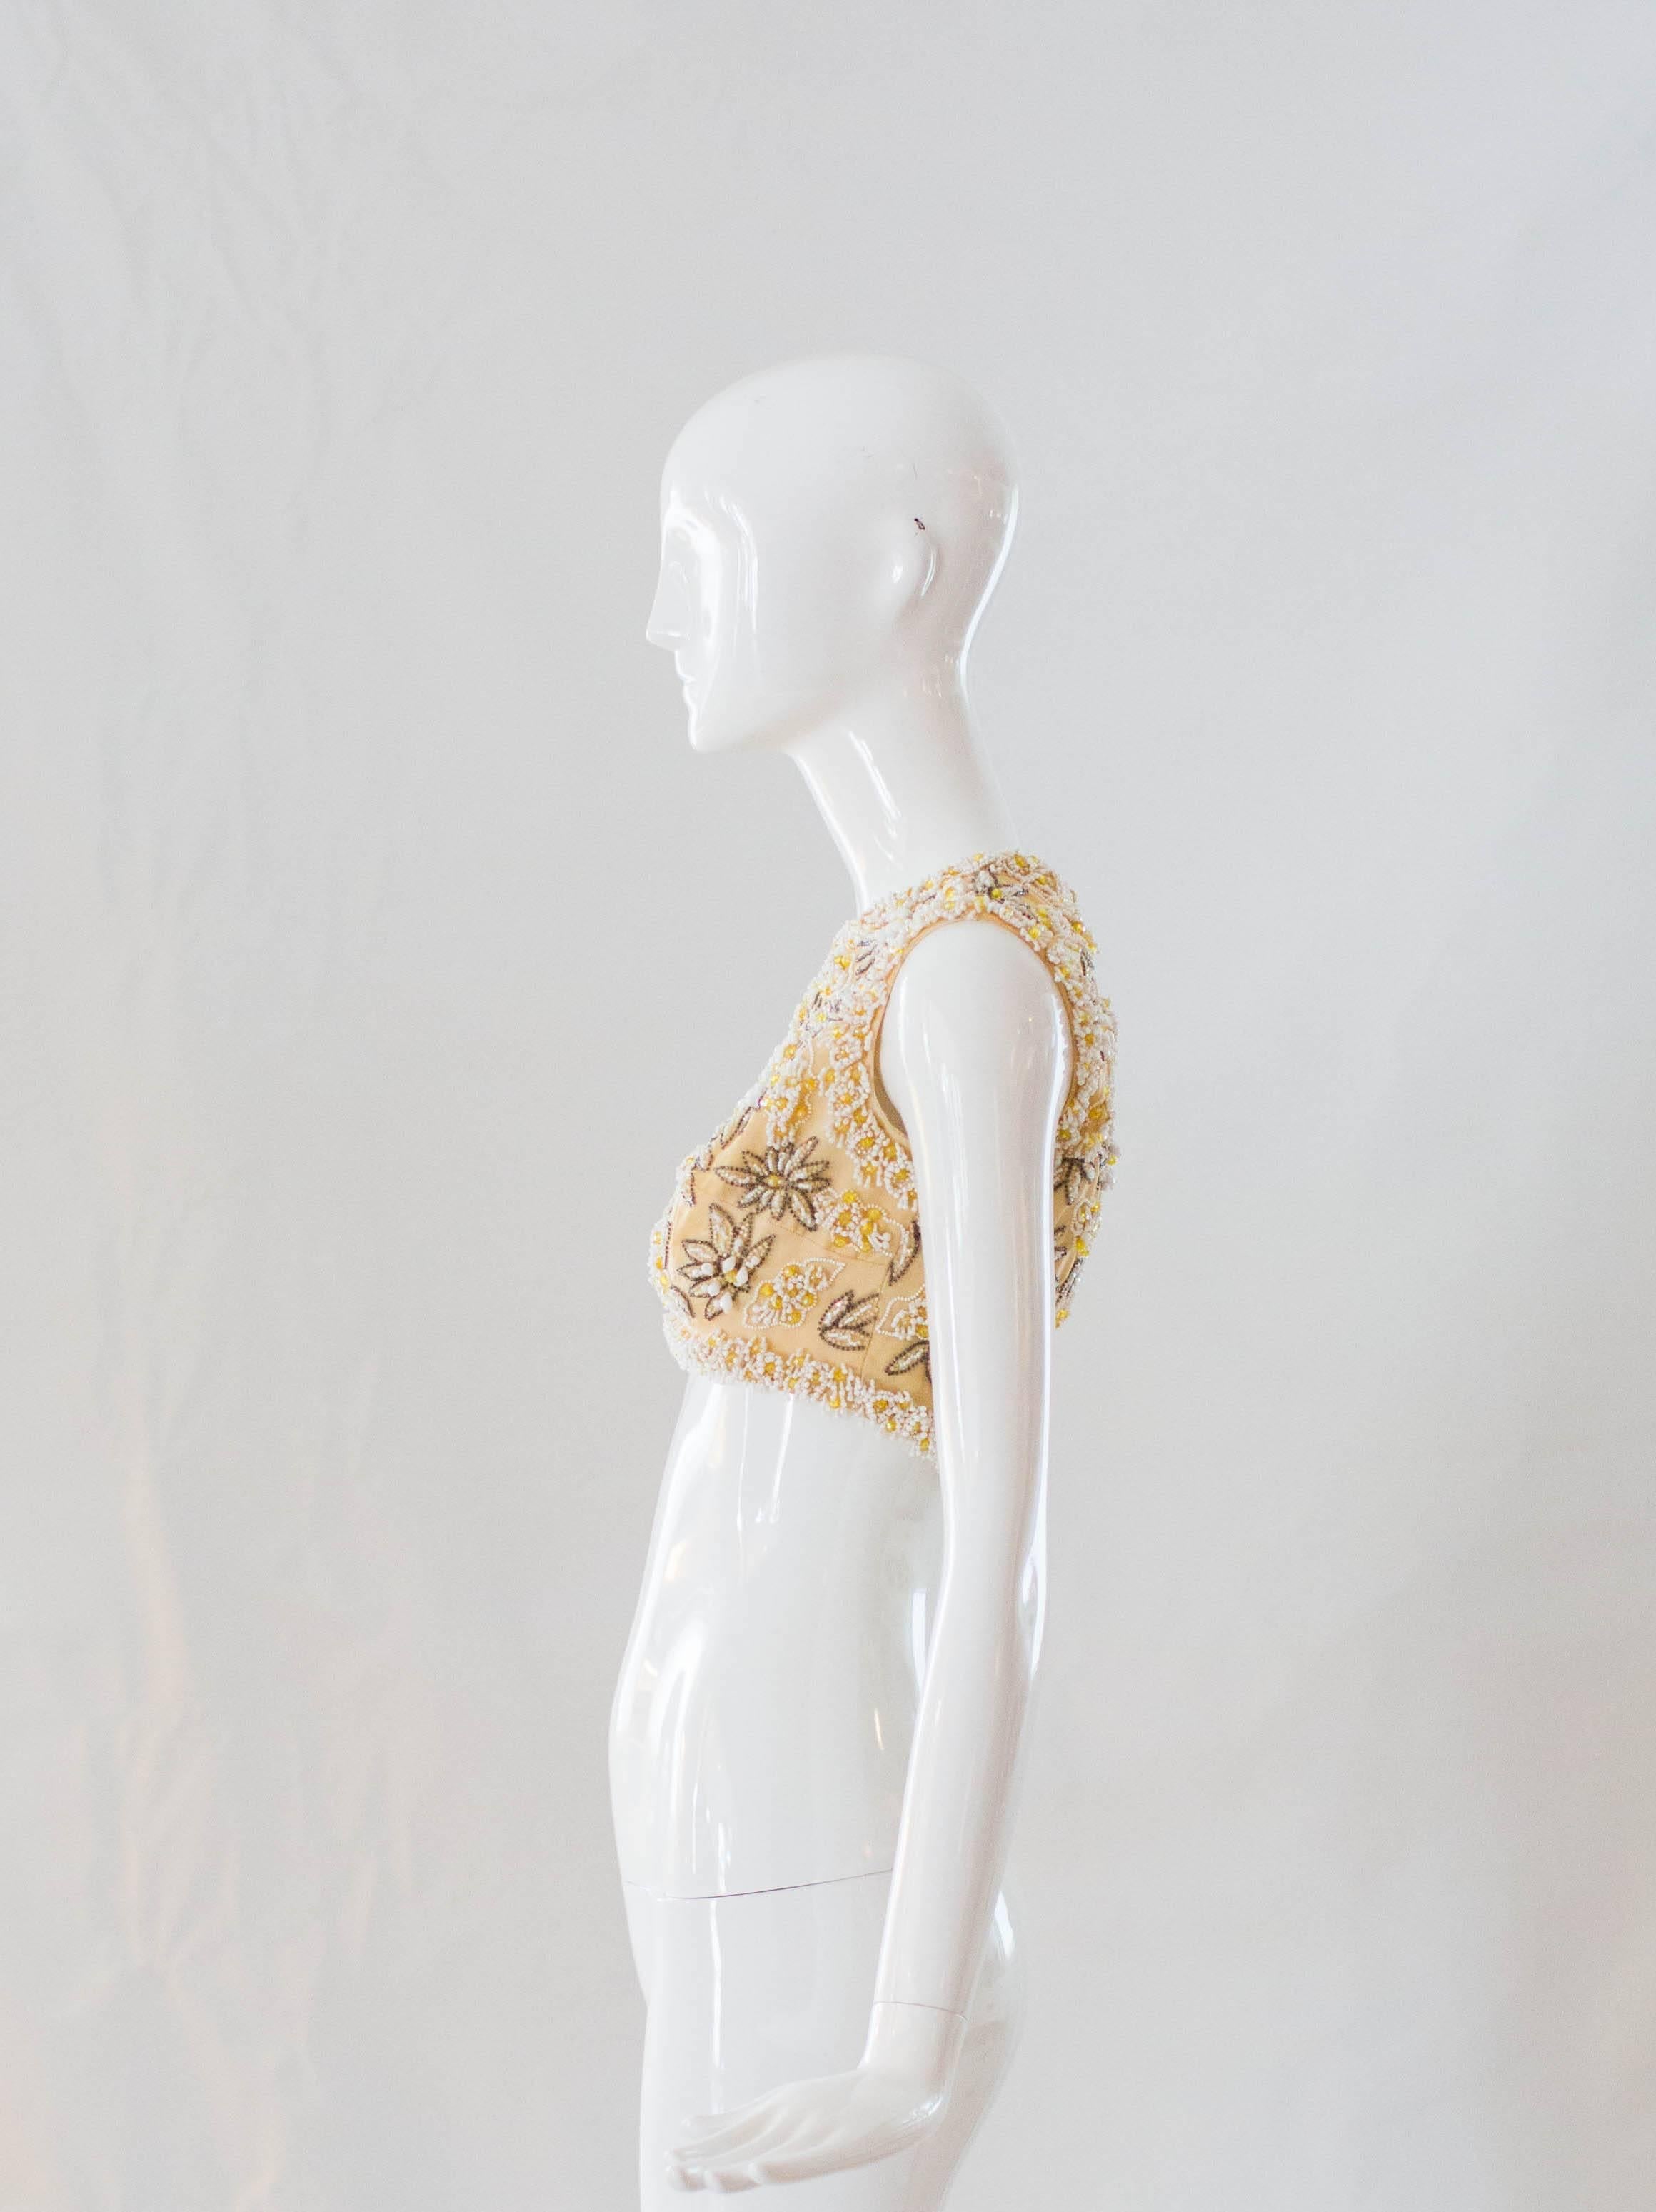 Victoria Royal Ltd. Beaded Crop Top, 1960s  In Excellent Condition For Sale In Houston, TX